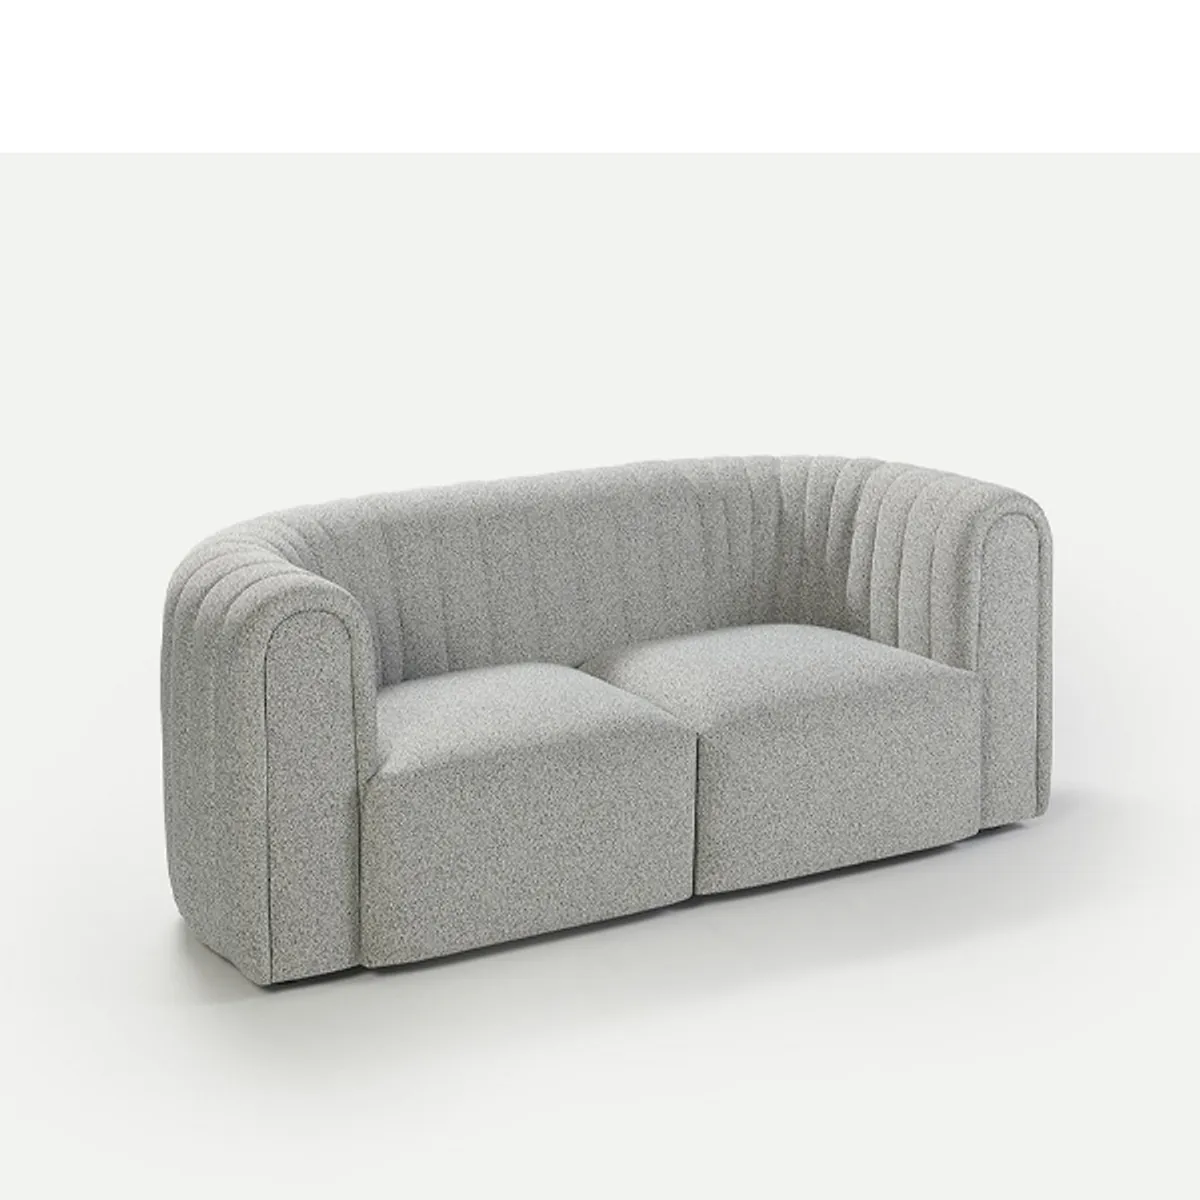 Core small sofa Inside Out Contracts2